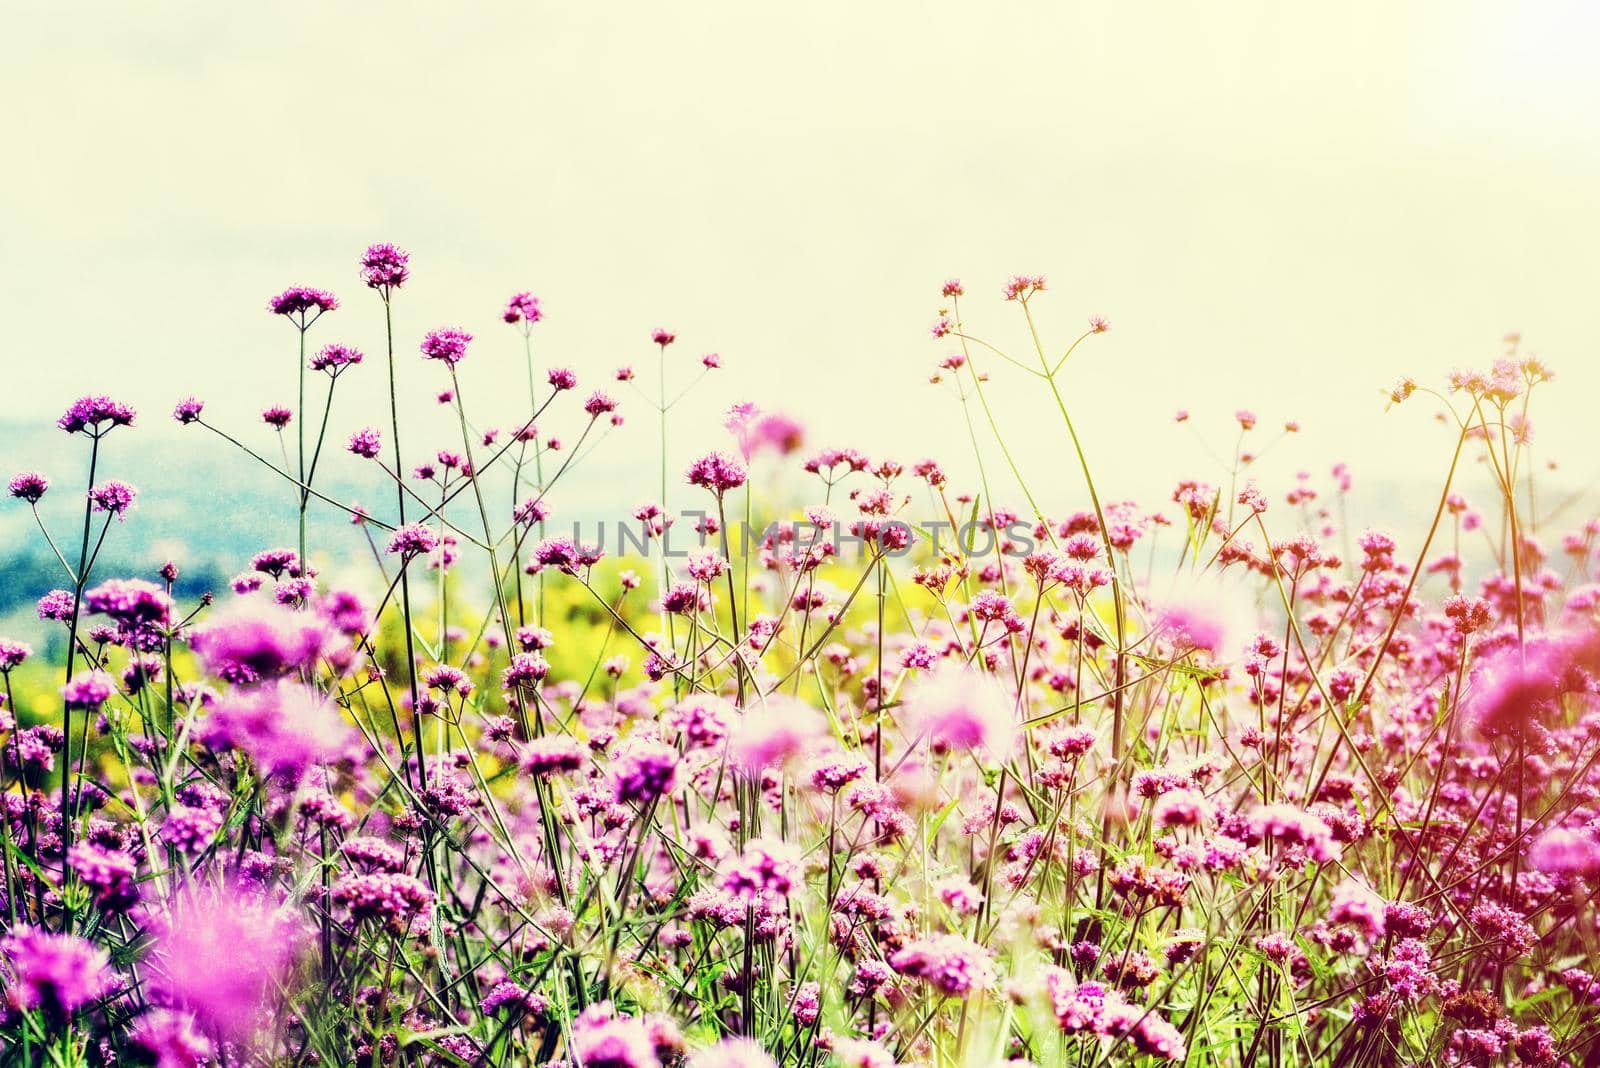 Beautiful nature purple flower field of Verbena Bonariensis or Purpletop Vervain under the bright sky and sunlight in the evening for background vintage style in Thailand